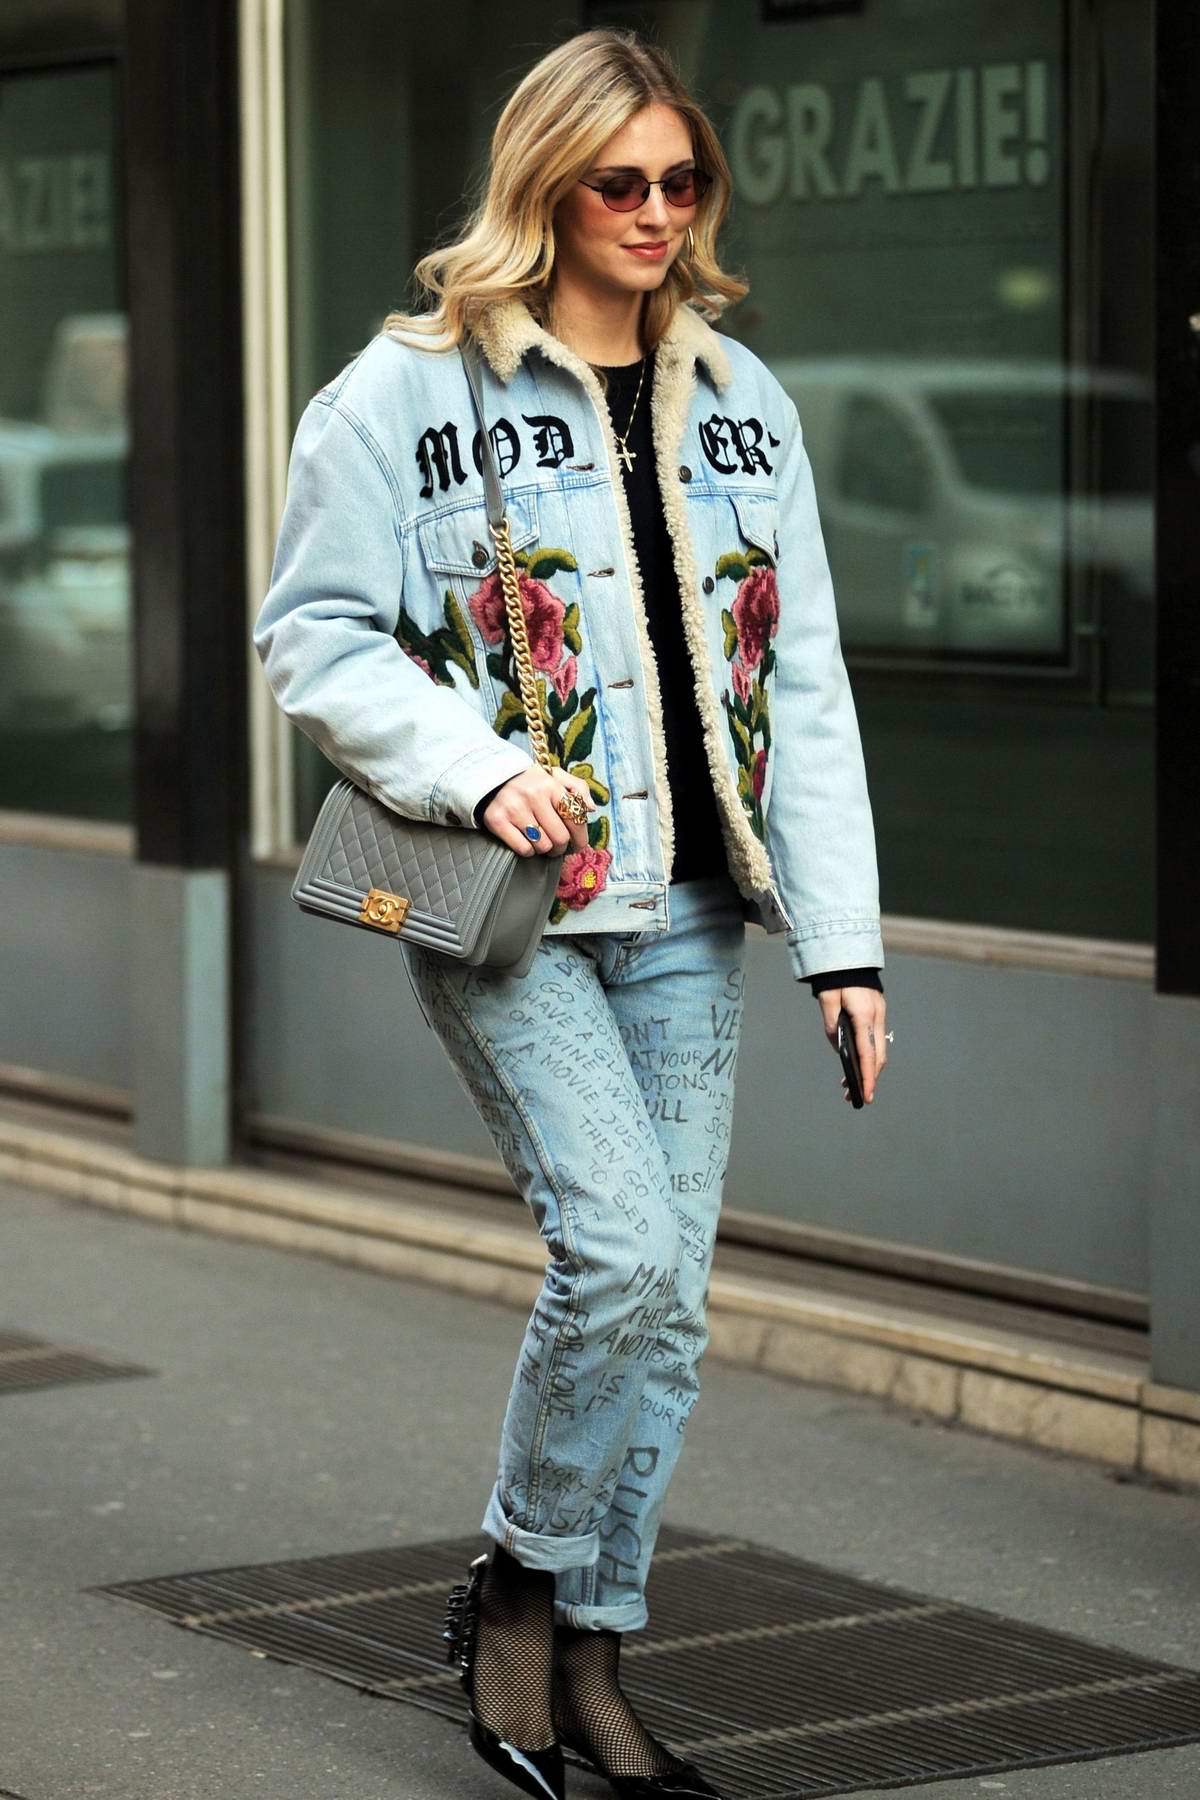 Chiara Ferragni rocks a stylish denim look while out and about in Milan ...